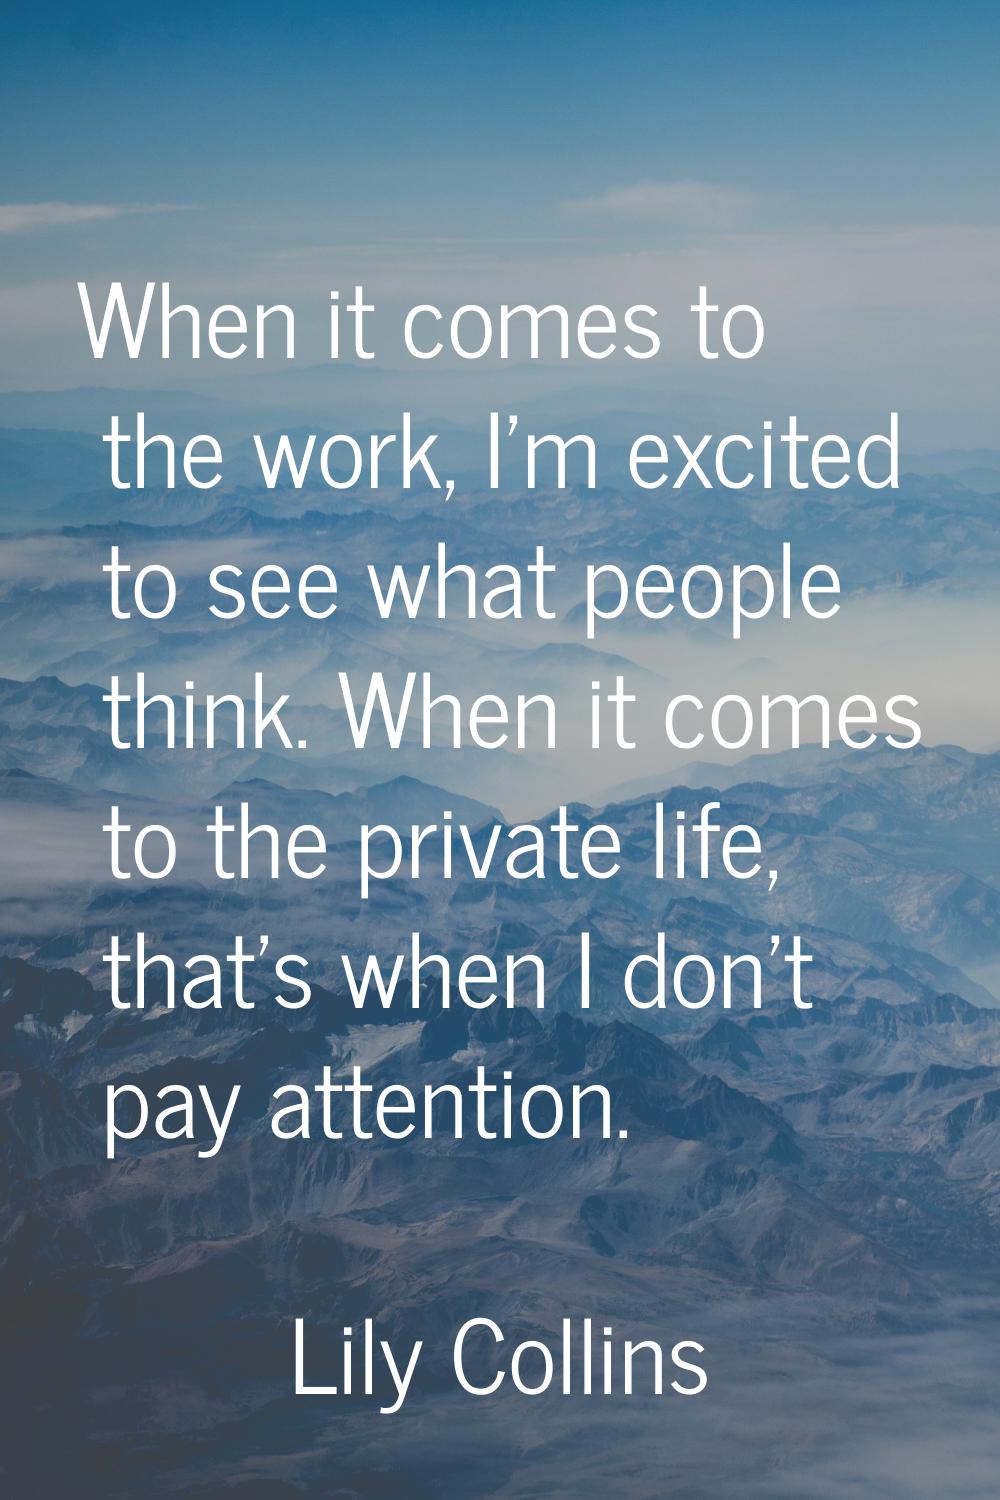 When it comes to the work, I'm excited to see what people think. When it comes to the private life,